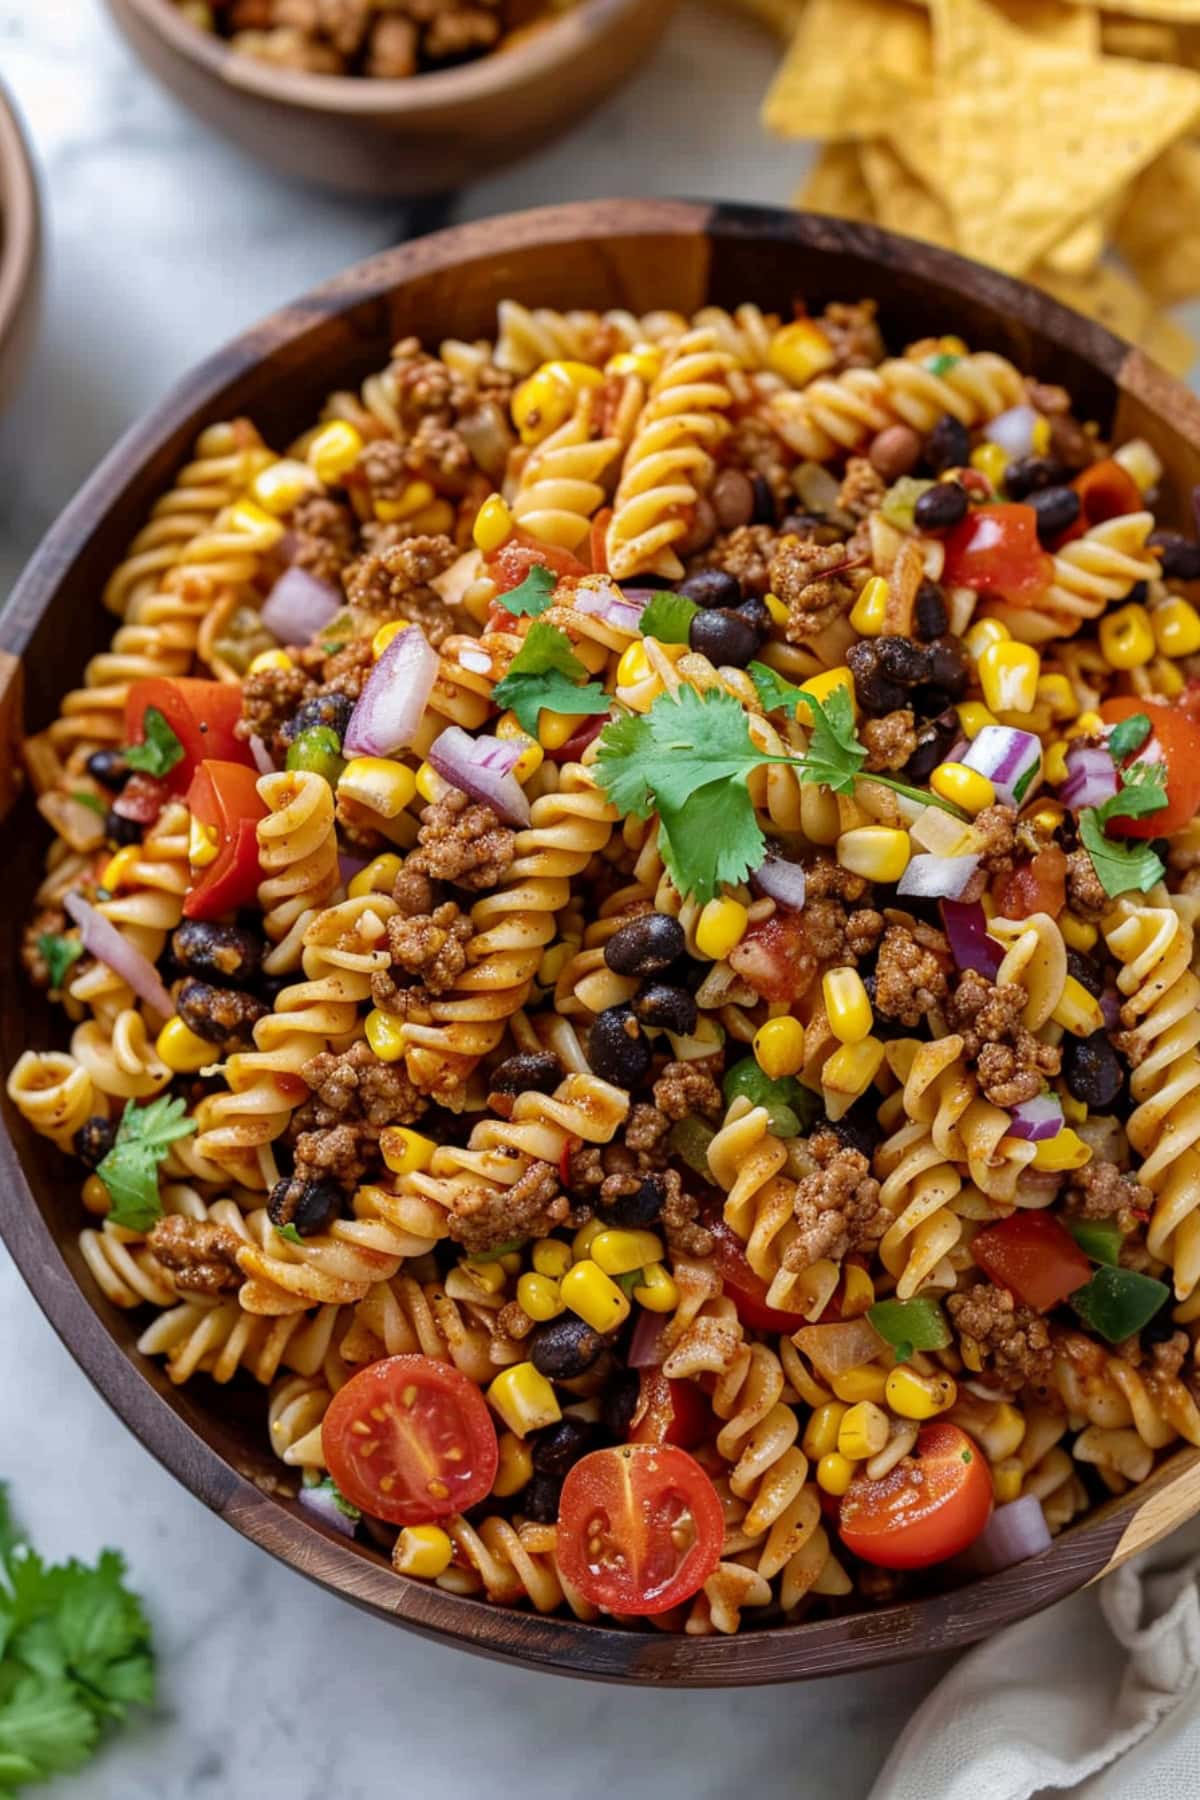 Taco pasta salad with tomatoes, red onions, black beans, corn kernels and cilantro on a wooden bowl with tortilla cchips on the side.